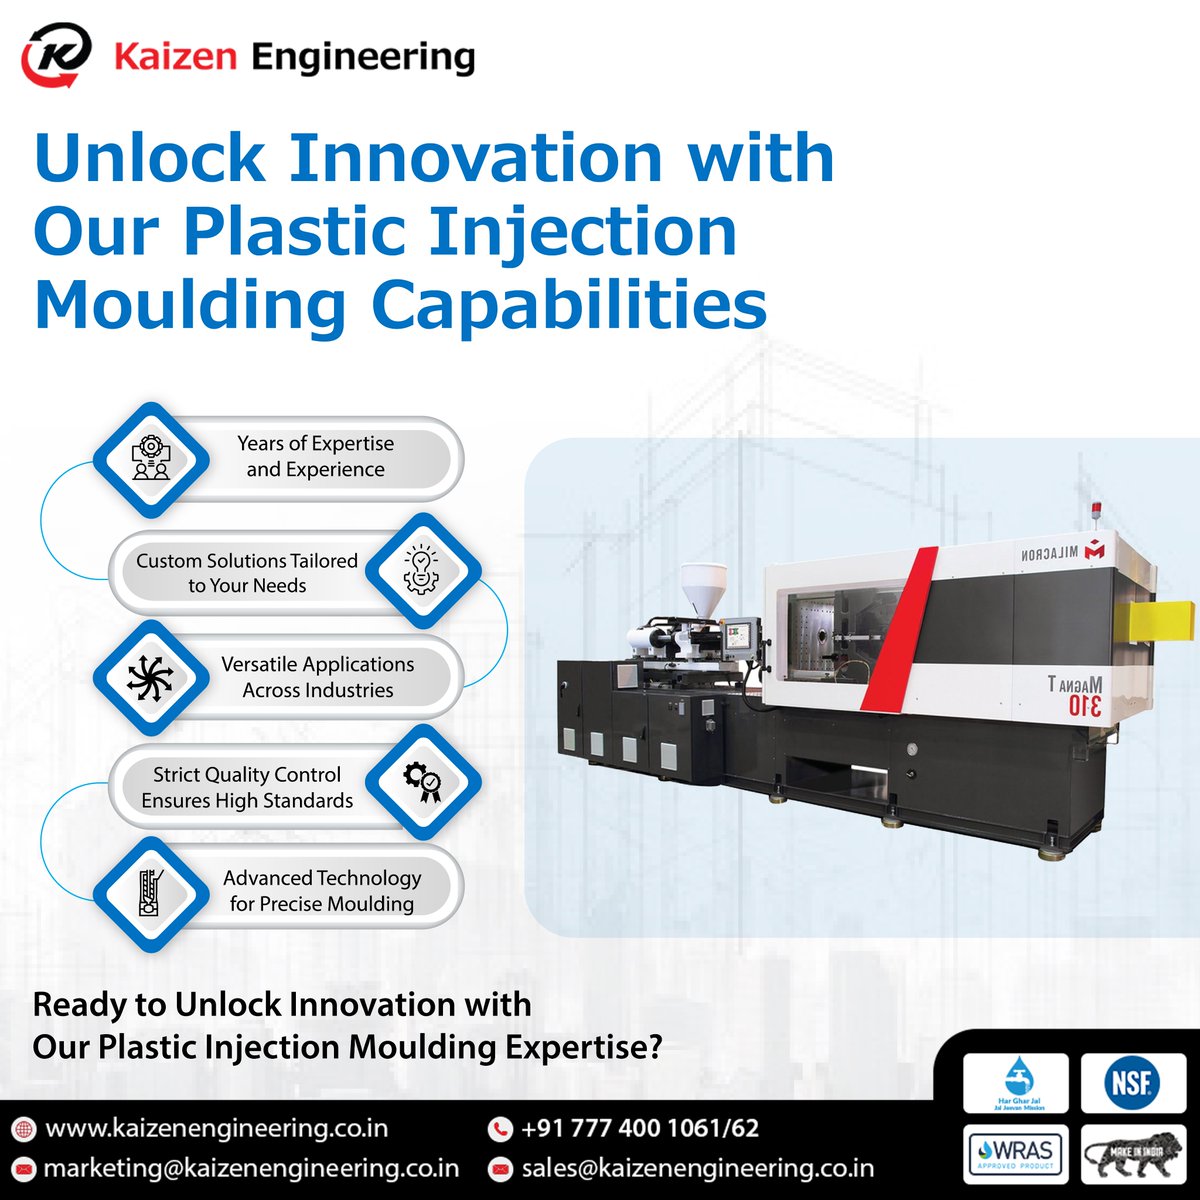 Transform your ideas into reality with our cutting-edge plastic injection moulding capabilities! From concept to creation, we've got you covered. Contact us today and unlock the power of innovation!

#plasticInjectionmoulding #injectionmoulding  #manufacturing #kaizenengineering